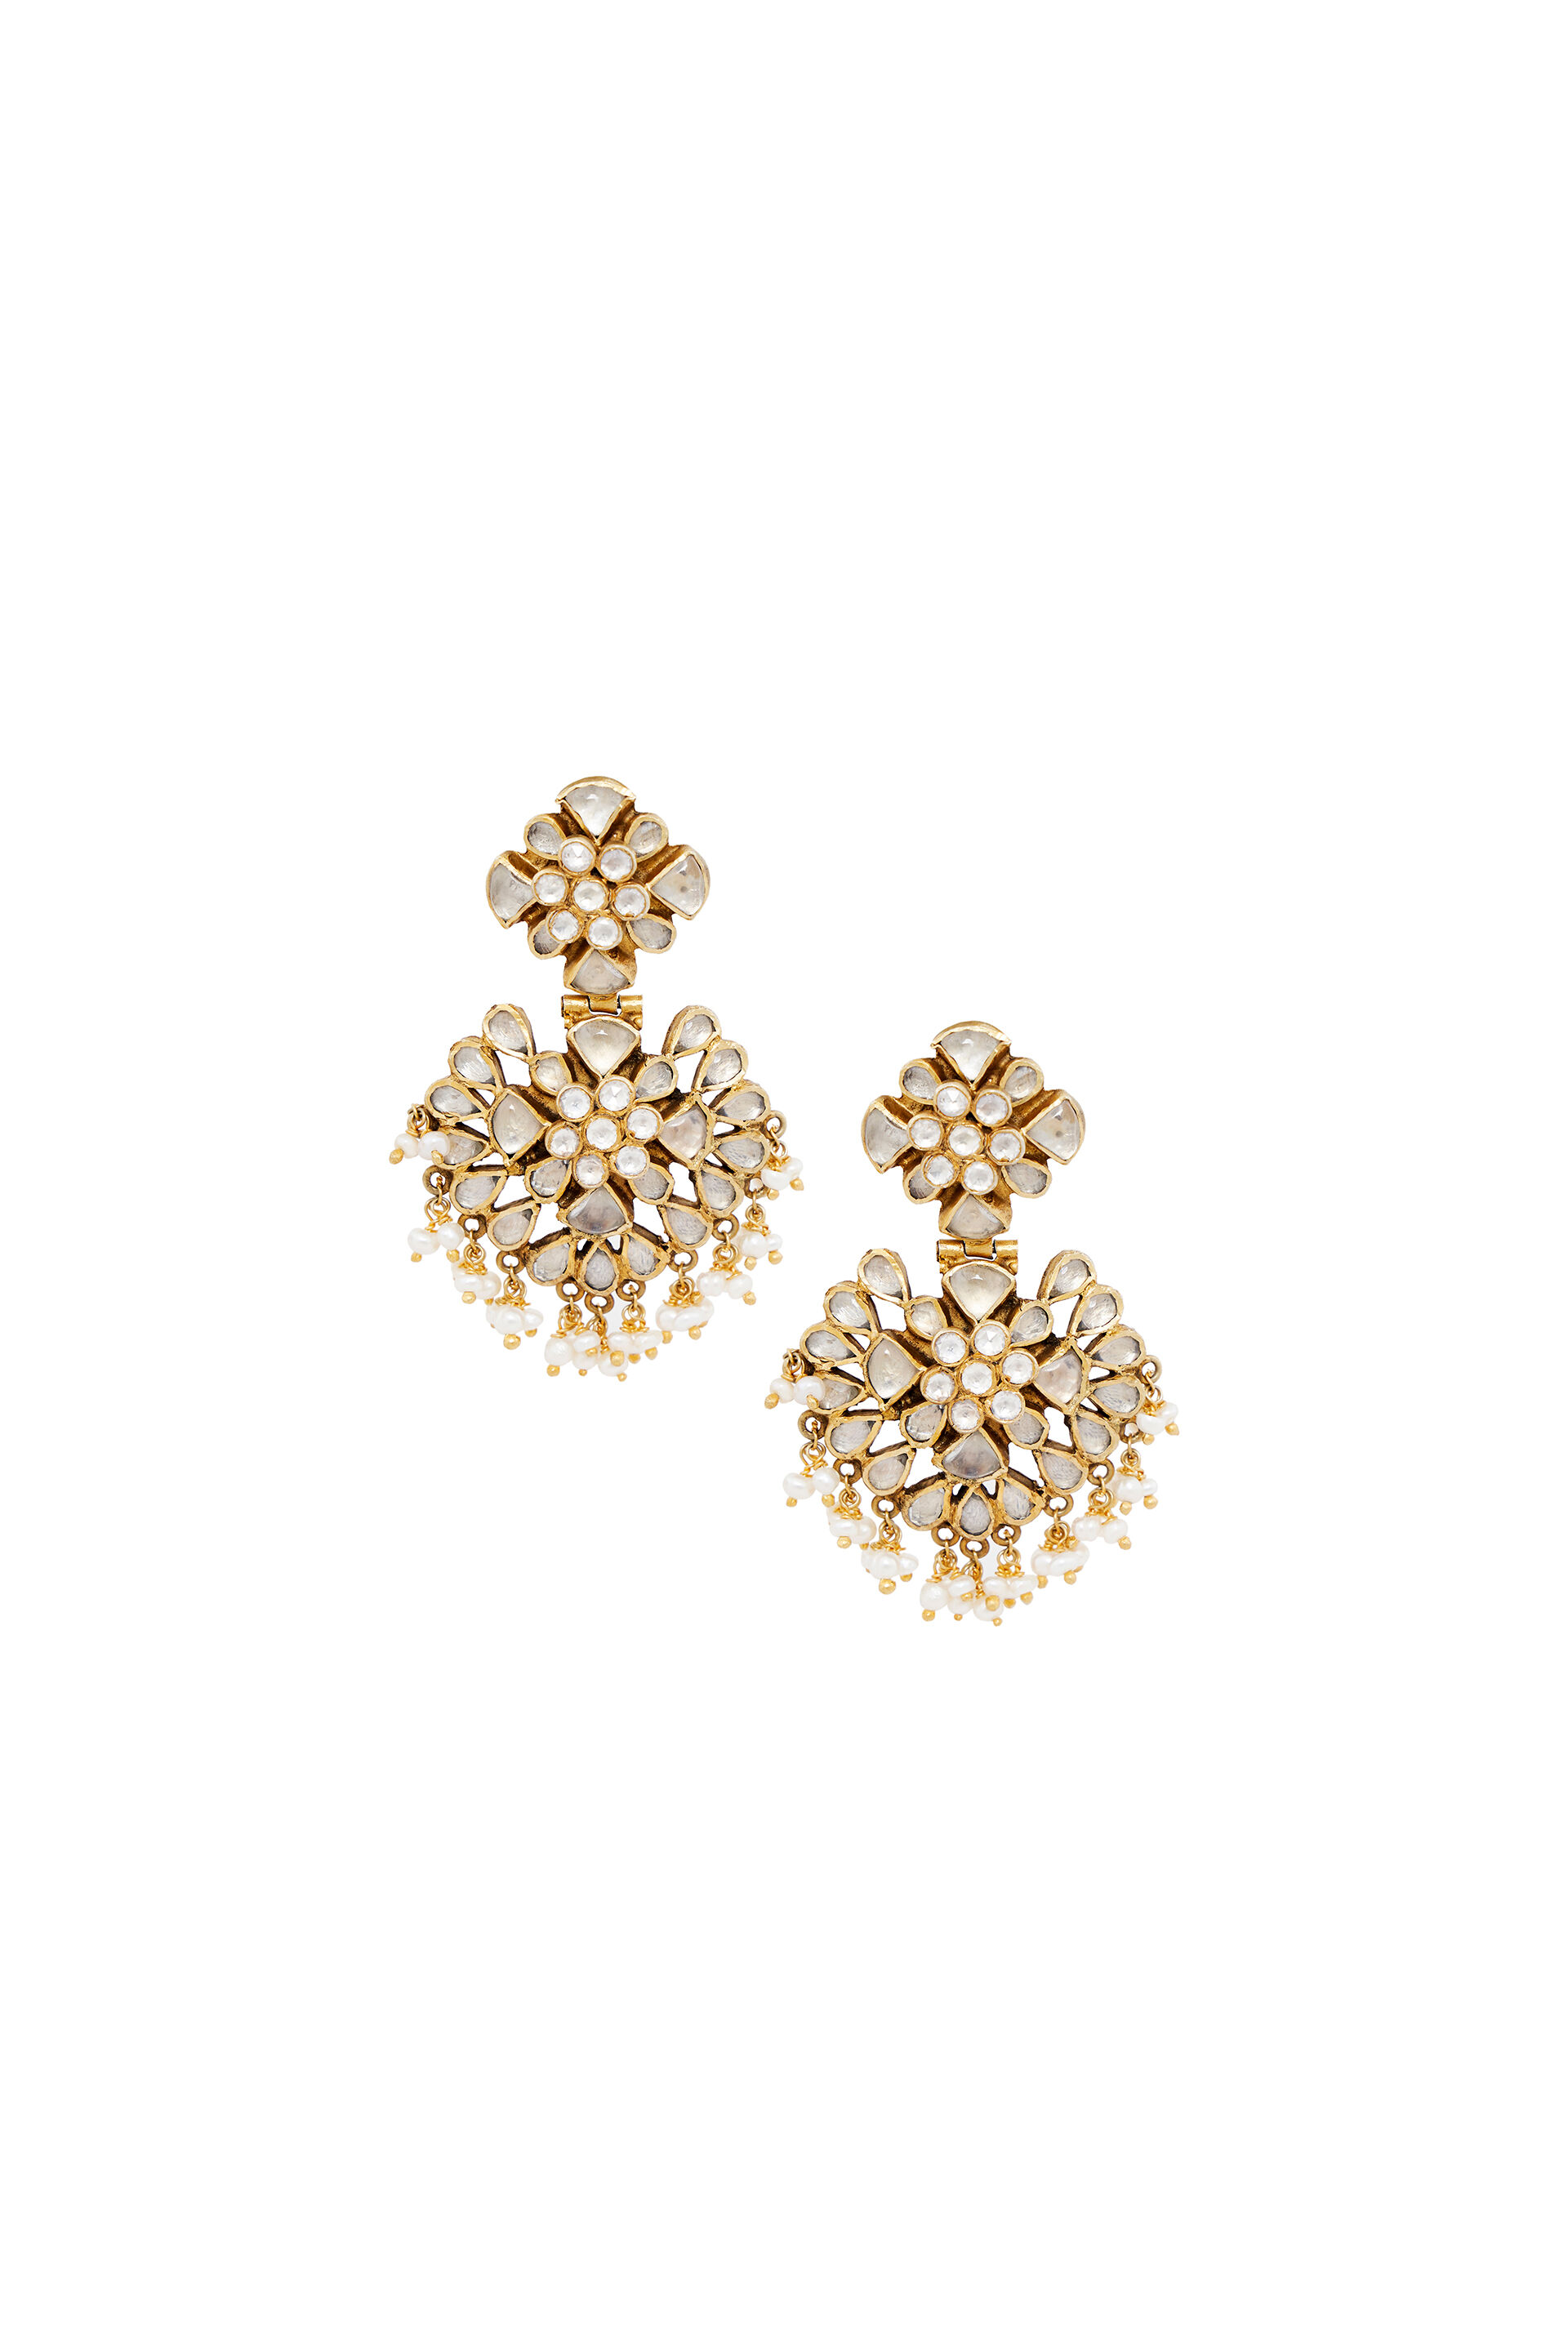 Buy Gold Plated Colorfull Meenakari Stone Earrings Online In India At  Discounted Prices